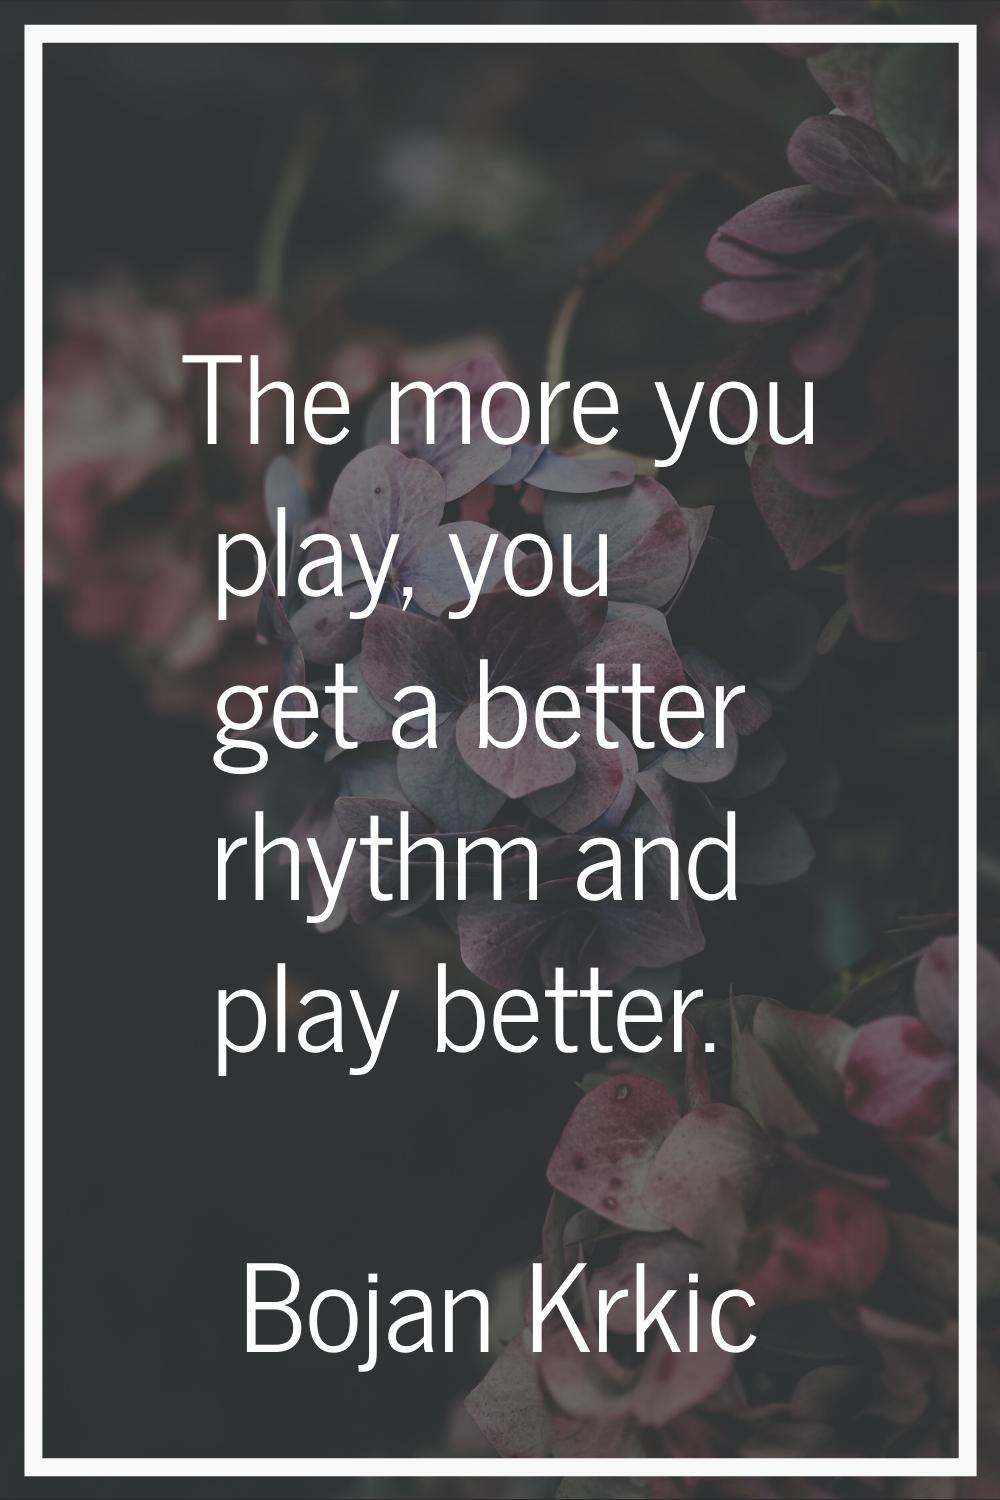 The more you play, you get a better rhythm and play better.